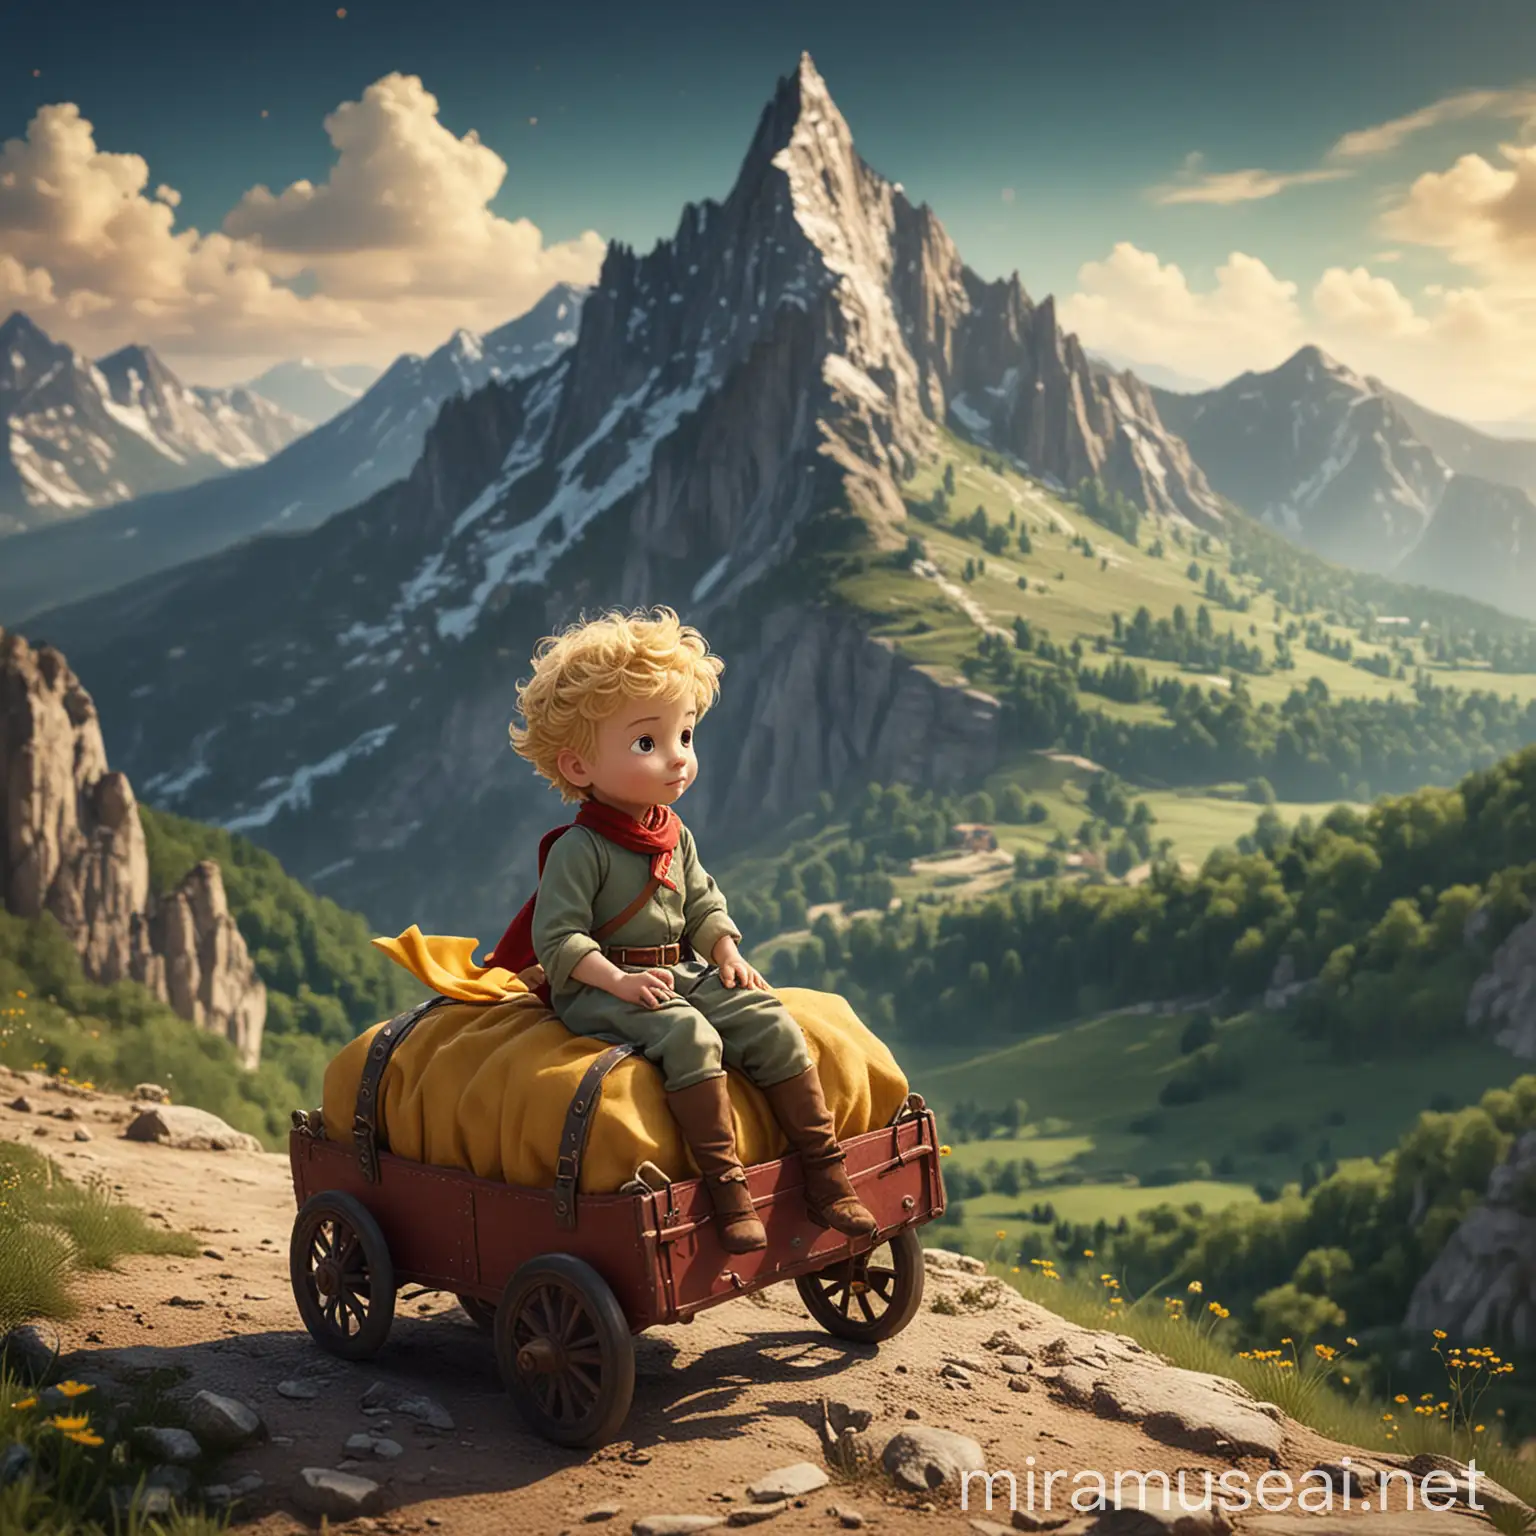 A little prince traveling in a mountain
